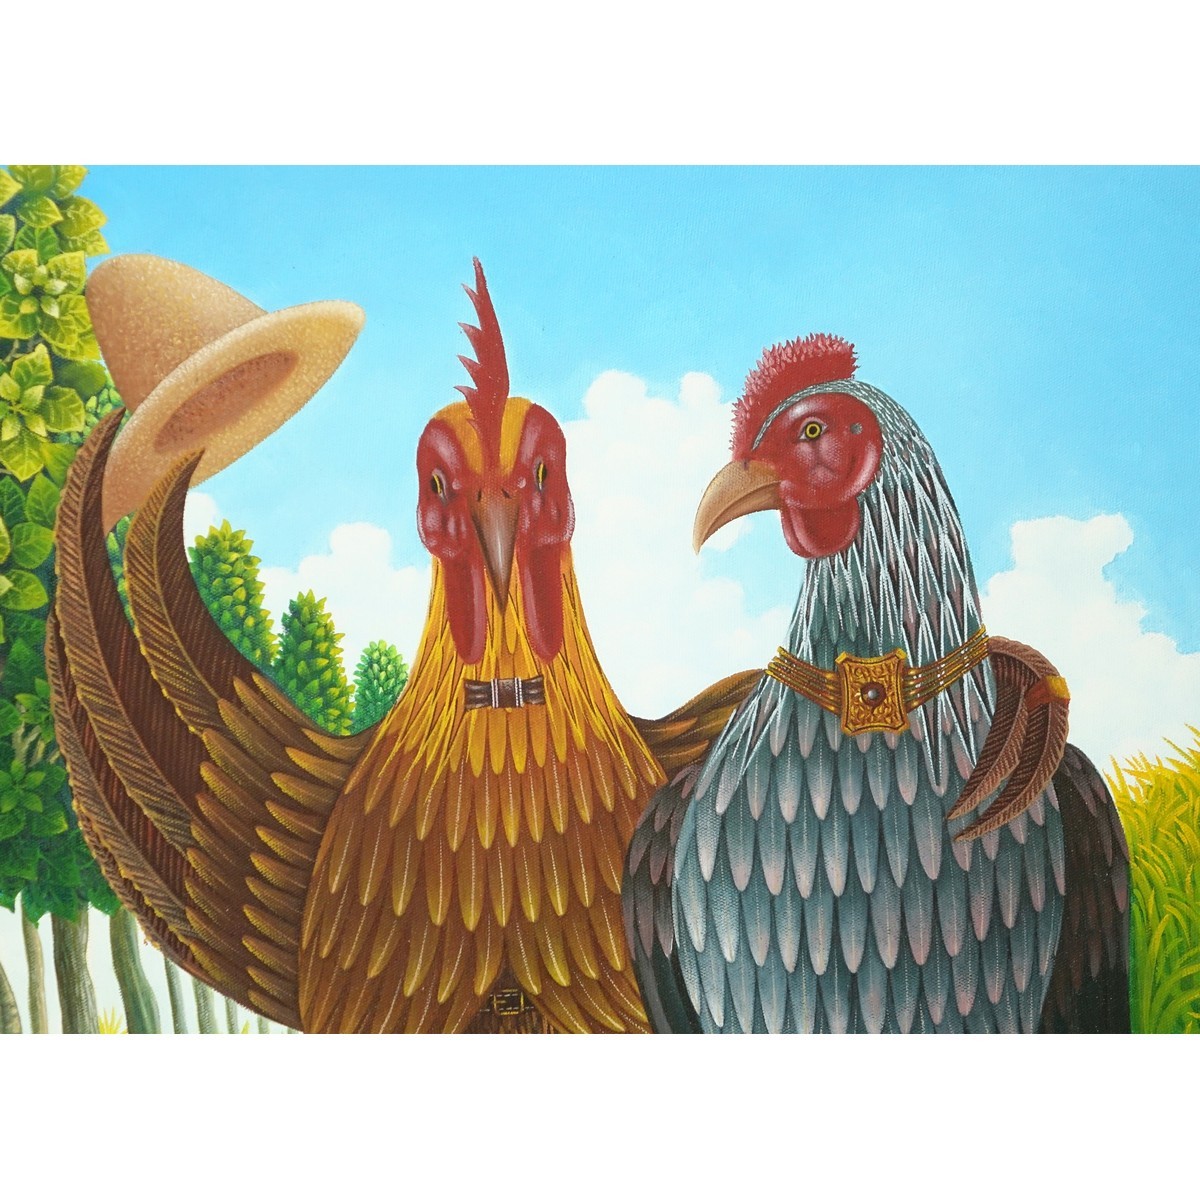 Fritzner Lamour, Haitian  (born 1948) Oil on Canvas, Bird Couple, Signed Lower Left. Good condition.